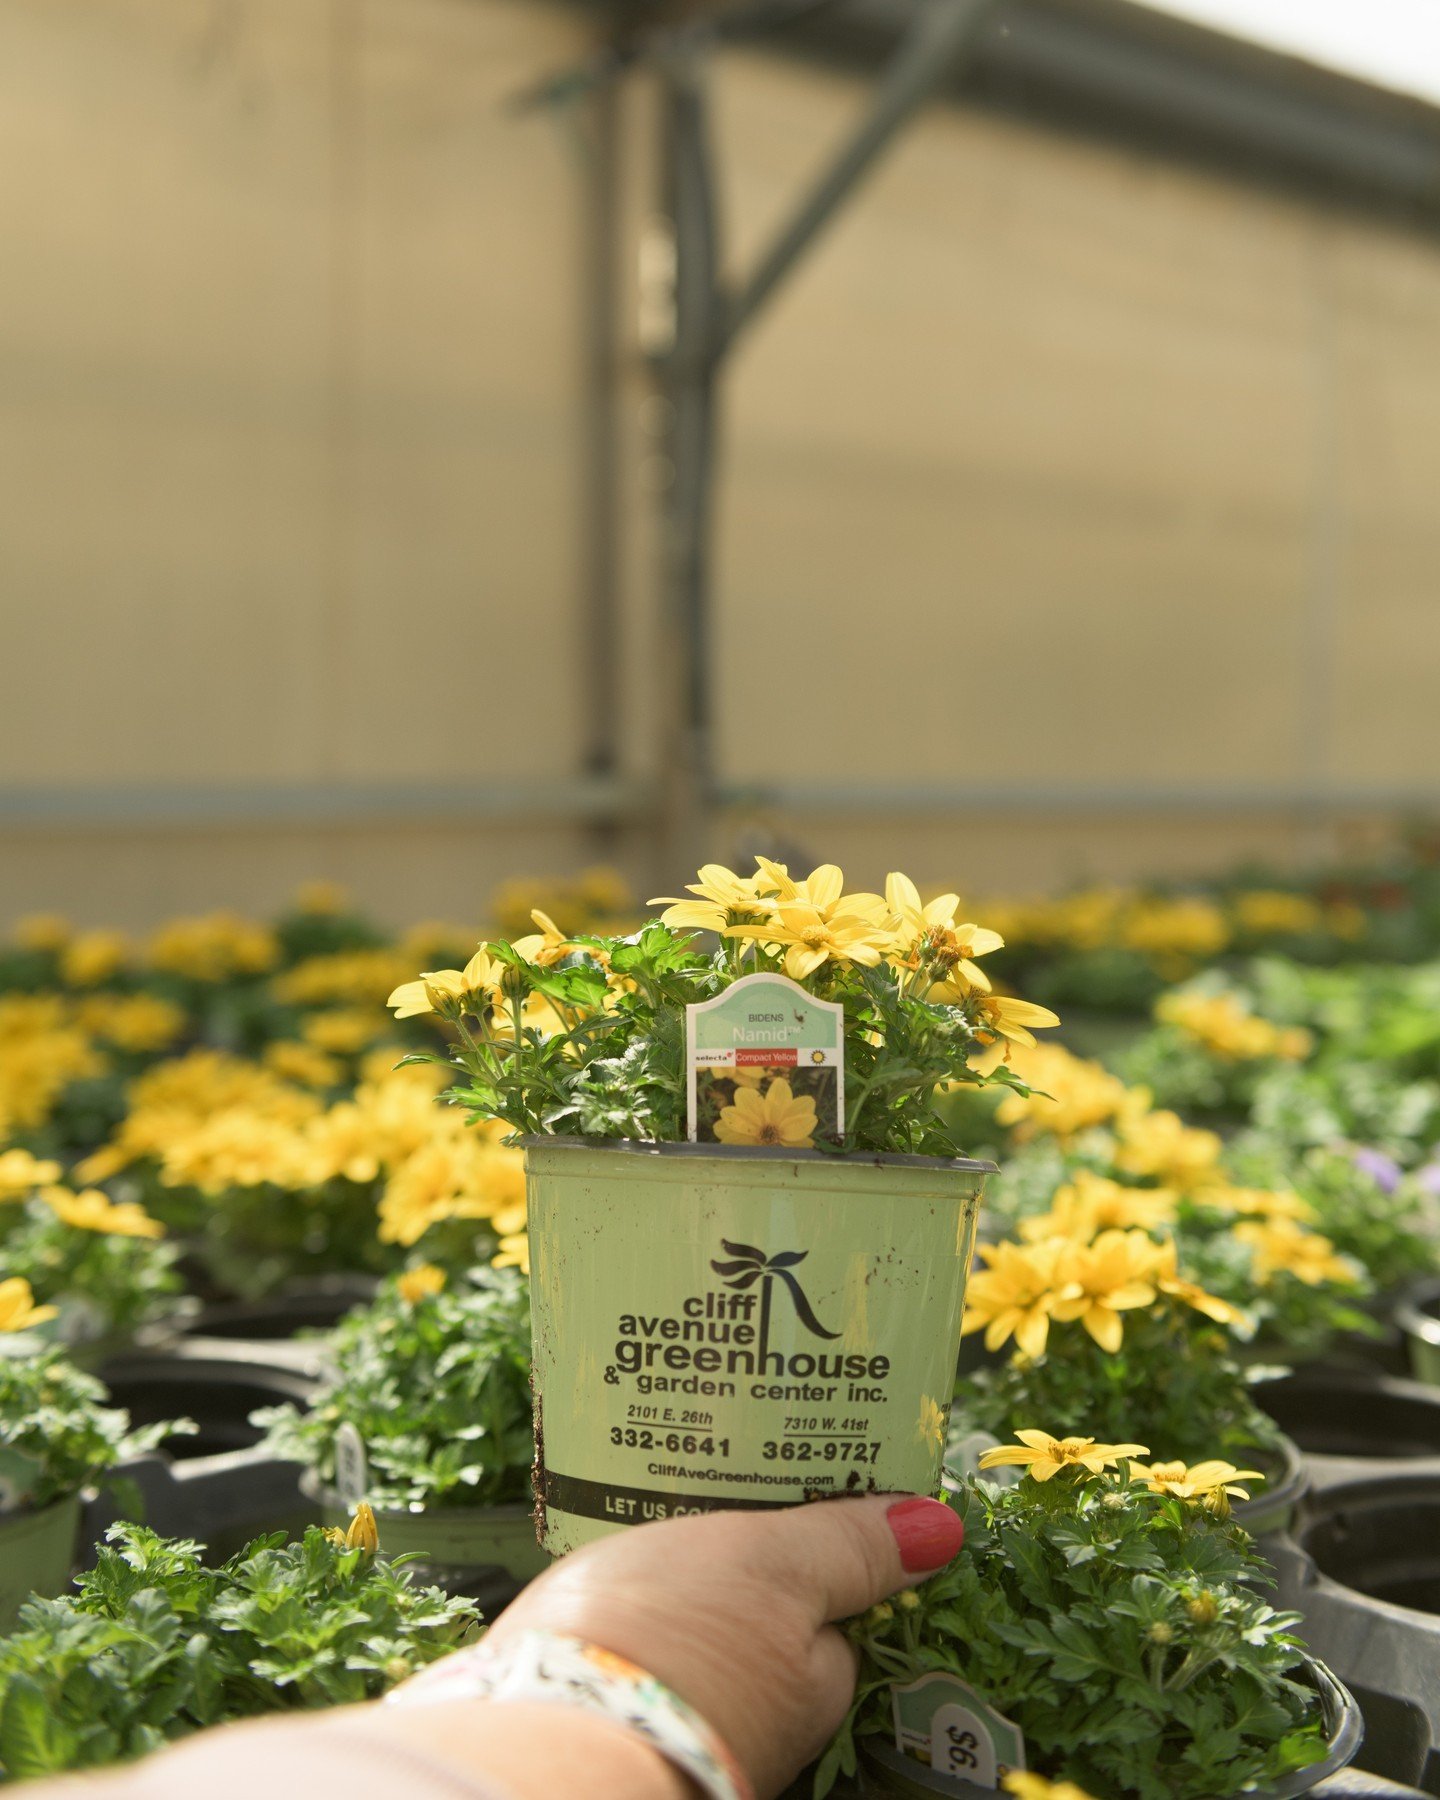 A couple 💡's for that graduation open house you're throwing🎉🥳
Pro Tip: planting annuals that match with the school colors!